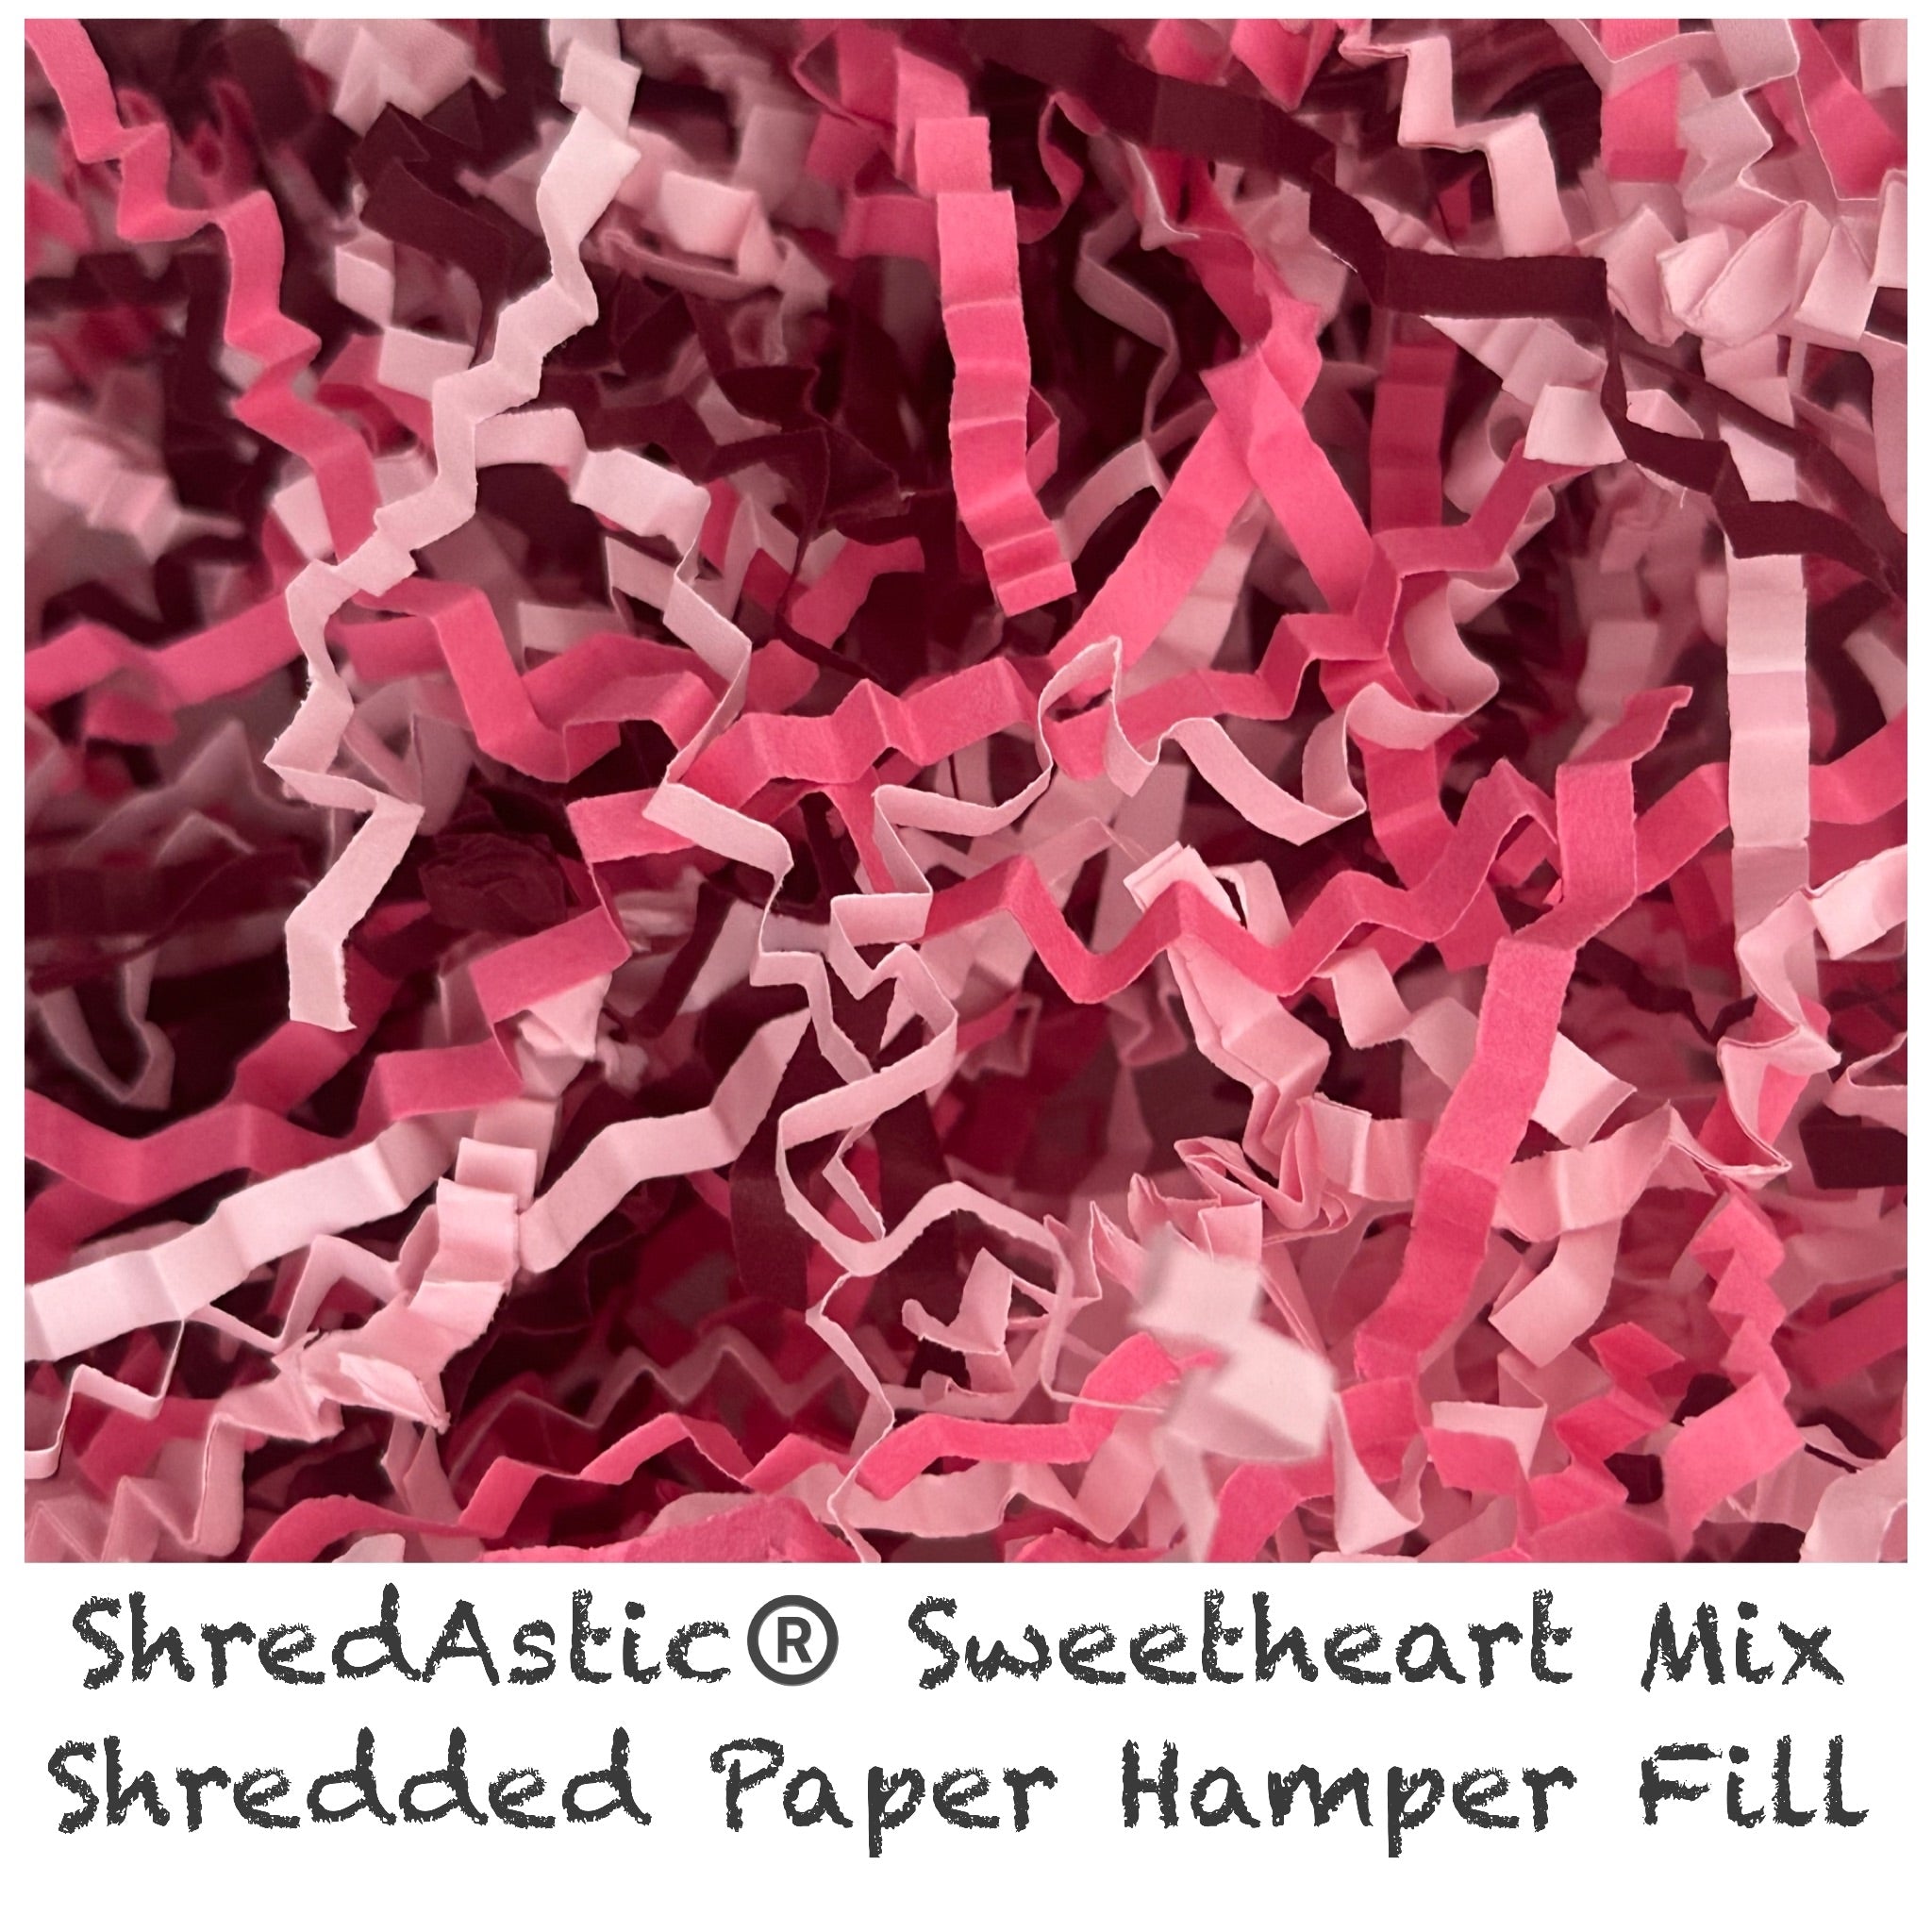 ShredAstic®️ Sweetheart Mix - Candy Pink, Pale Pink & Burgundy ZigZag Crinkle Paper Mix Valentines Mothers Day